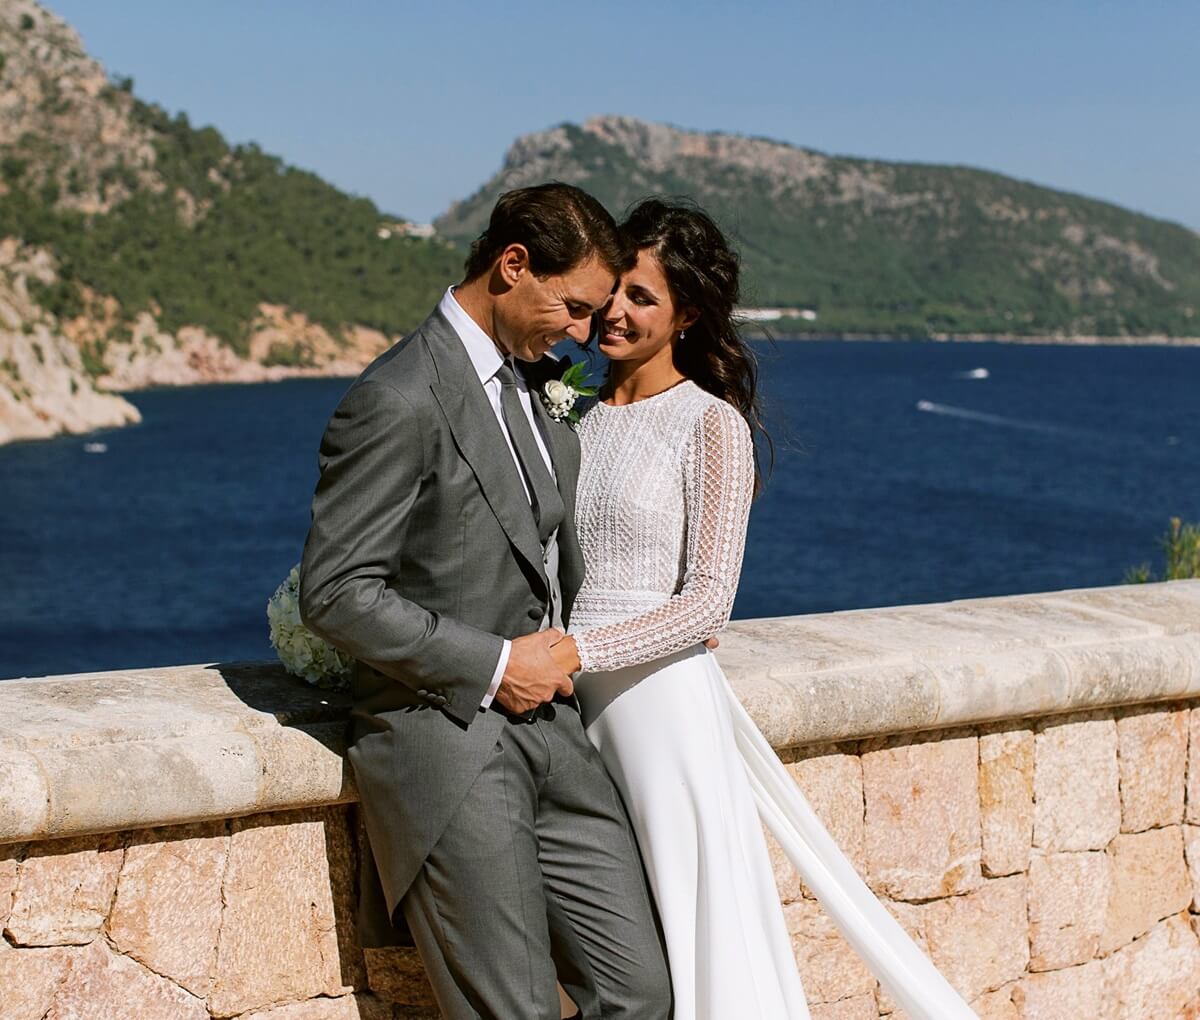 Rafal Nadal poses with wife Xisca Perello for the official wedding portraits